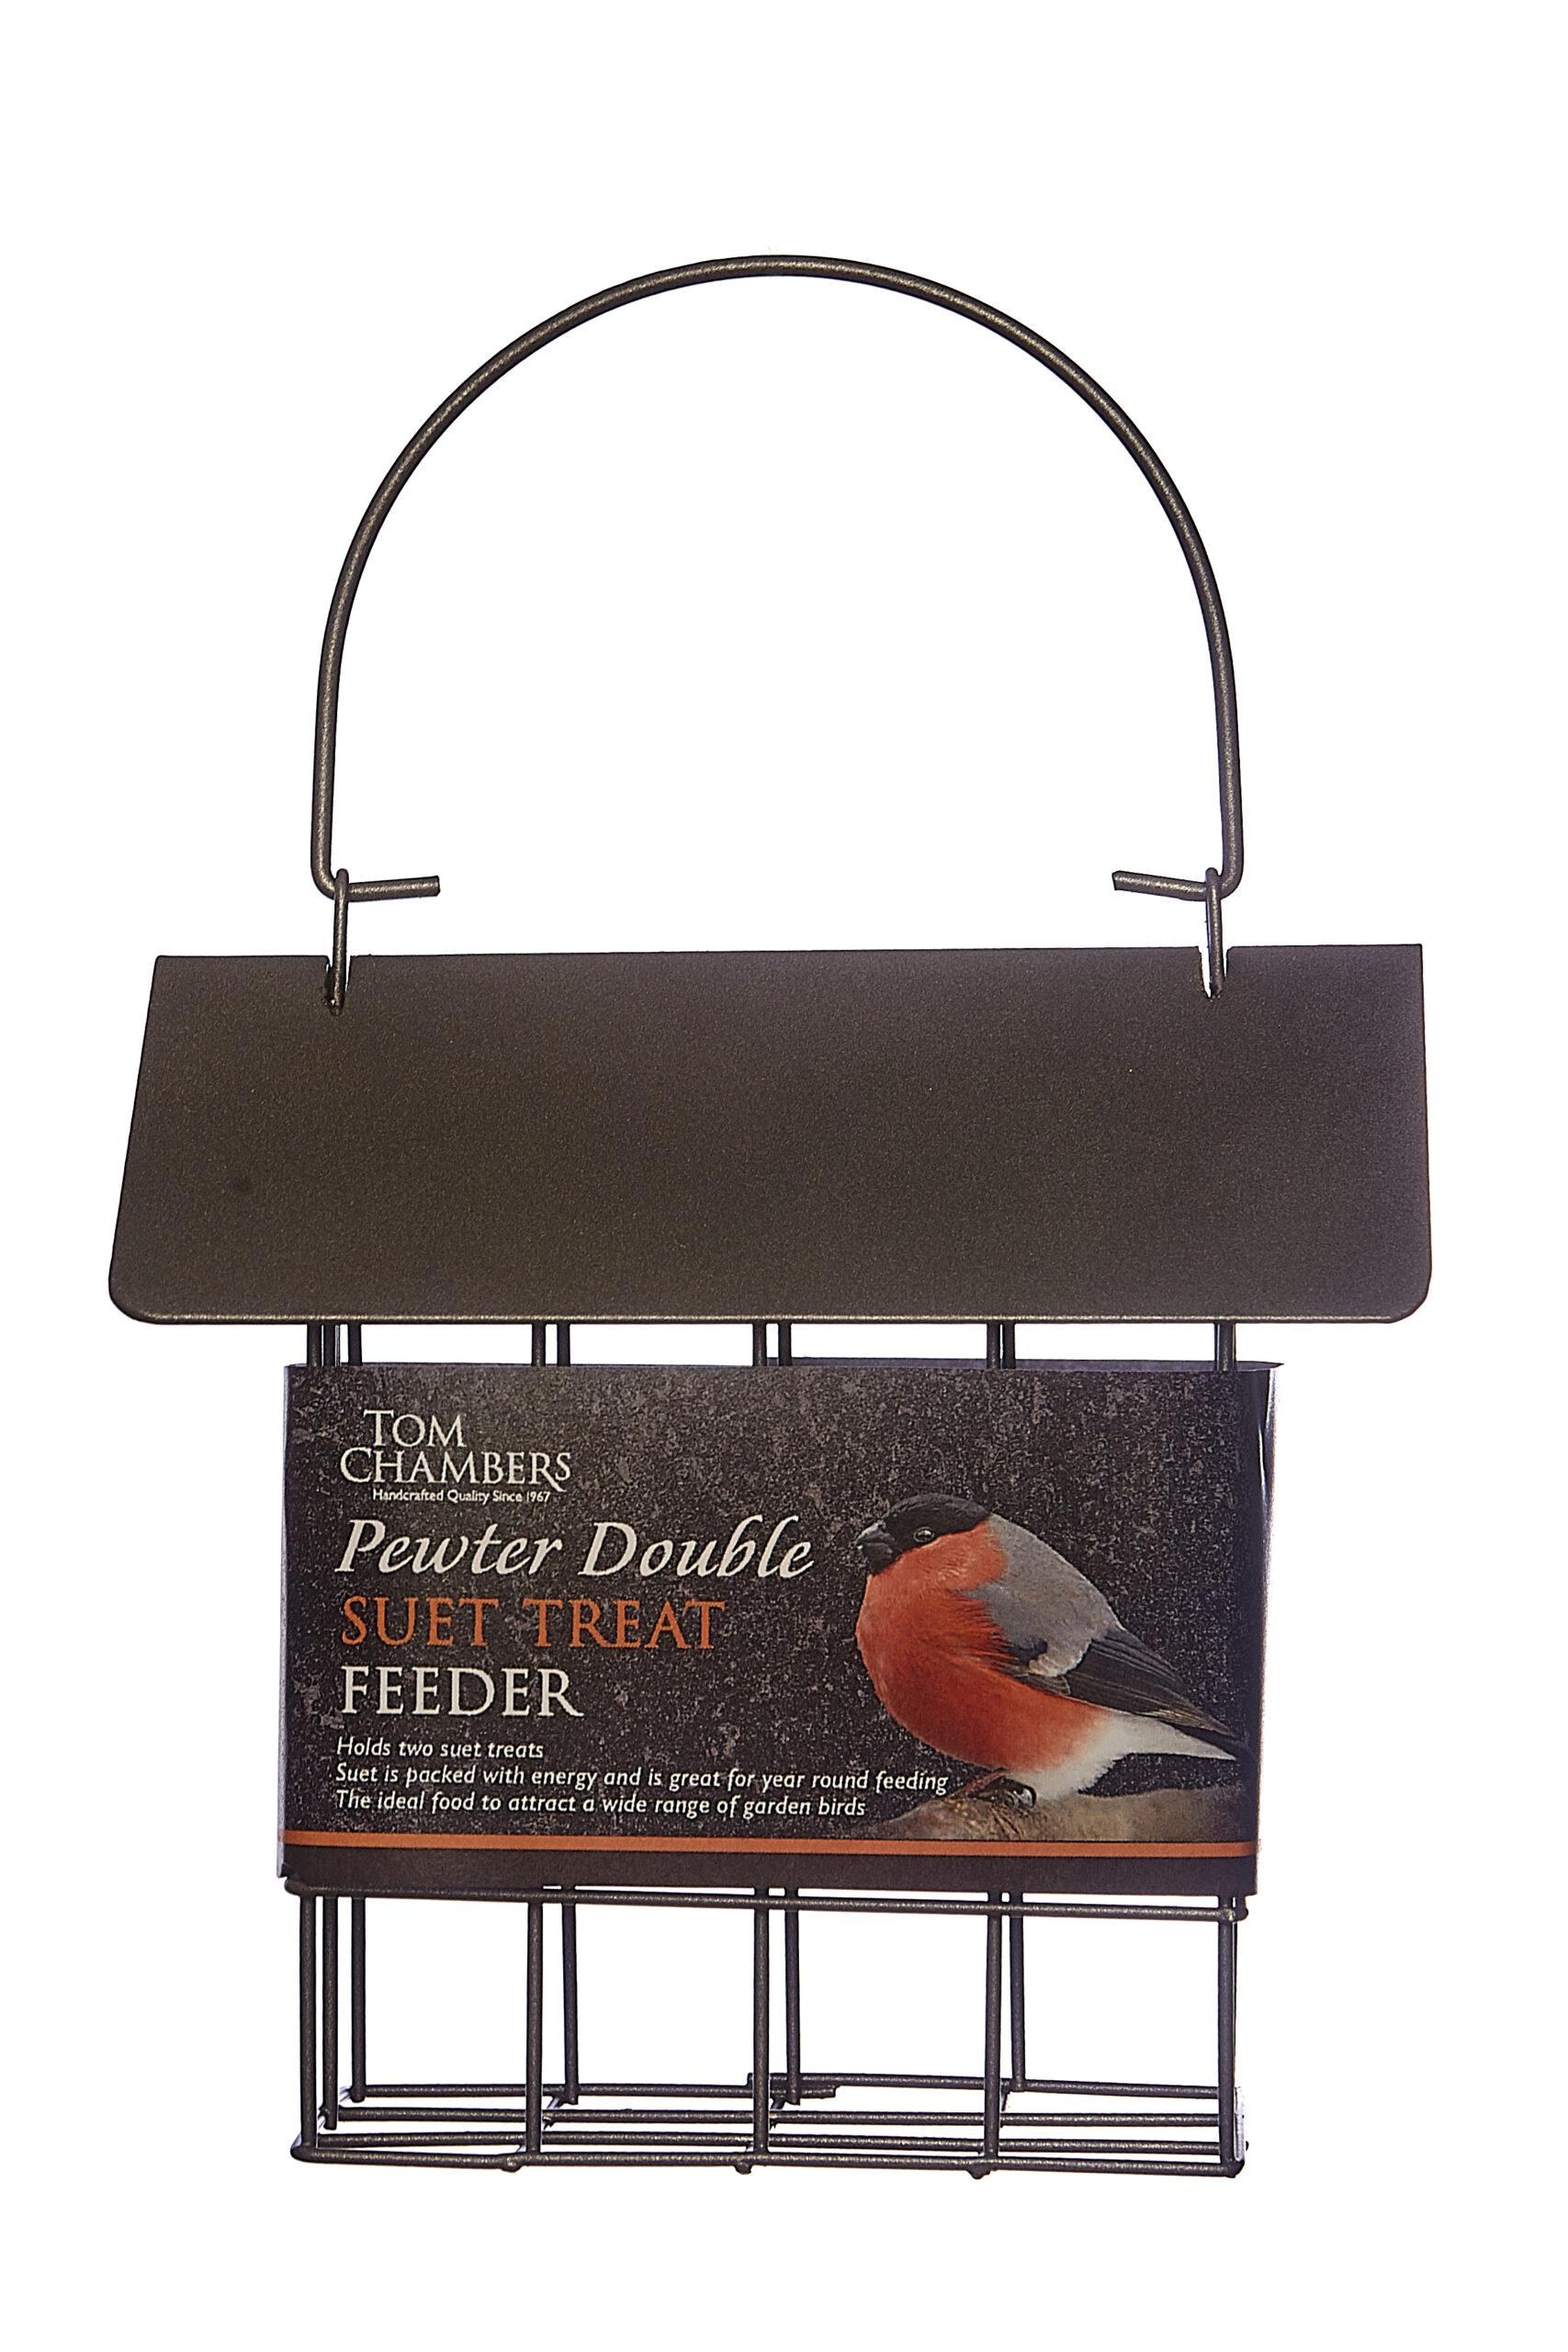 Tom chambers Pewter Double Suet Treat Feeder